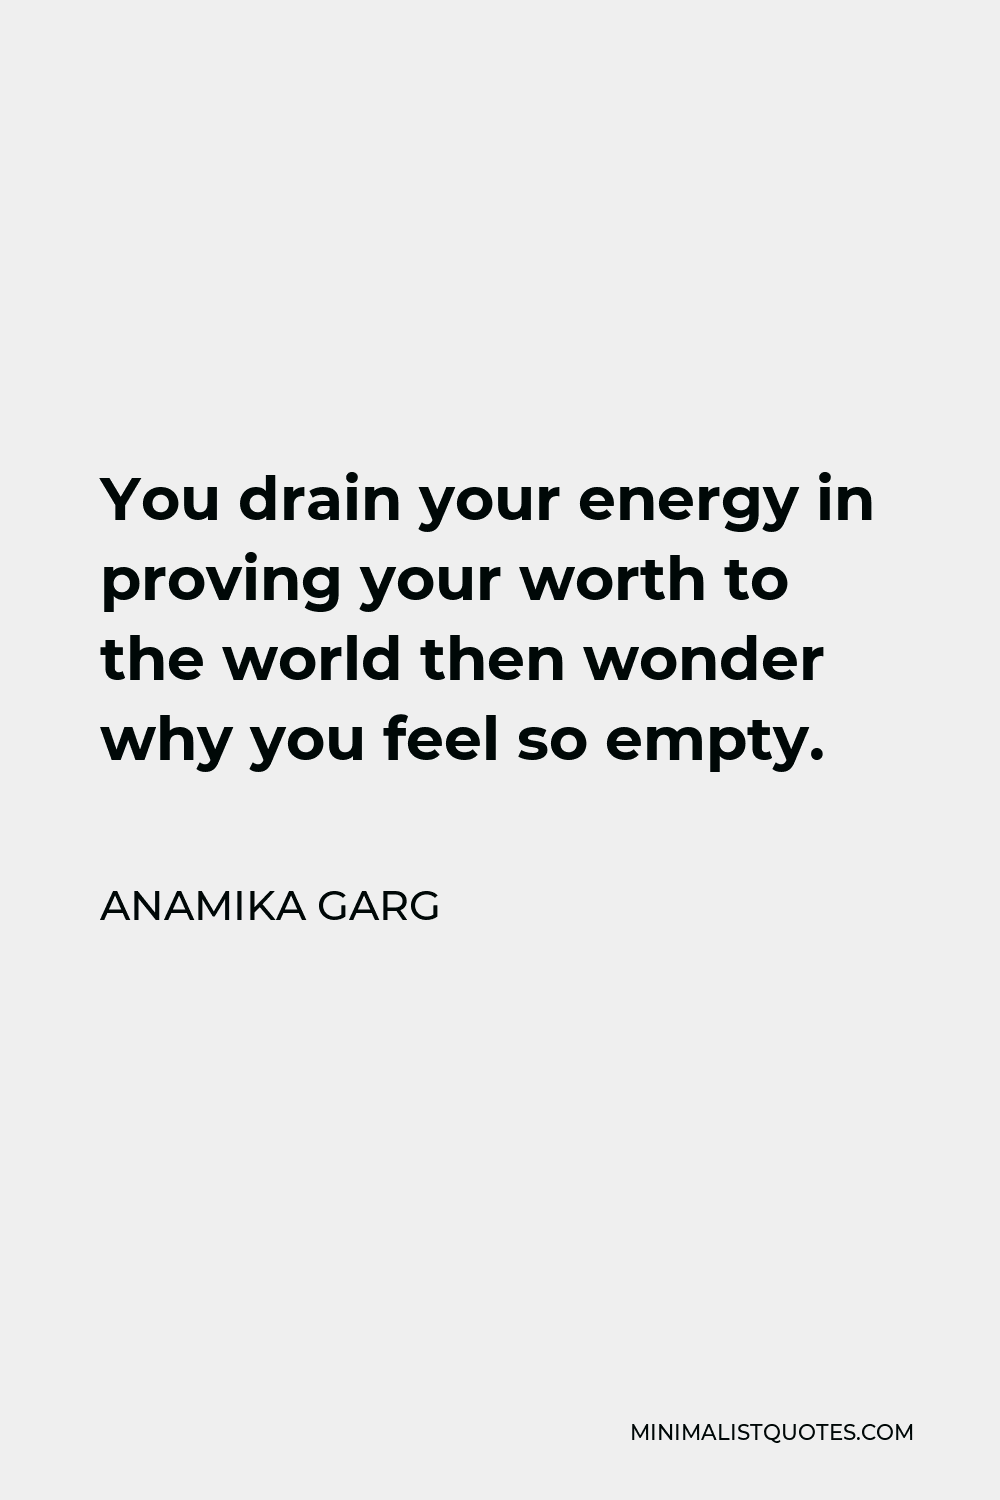 Anamika Garg Quote - You drain your energy in proving your worth to the world then wonder why you feel so empty.